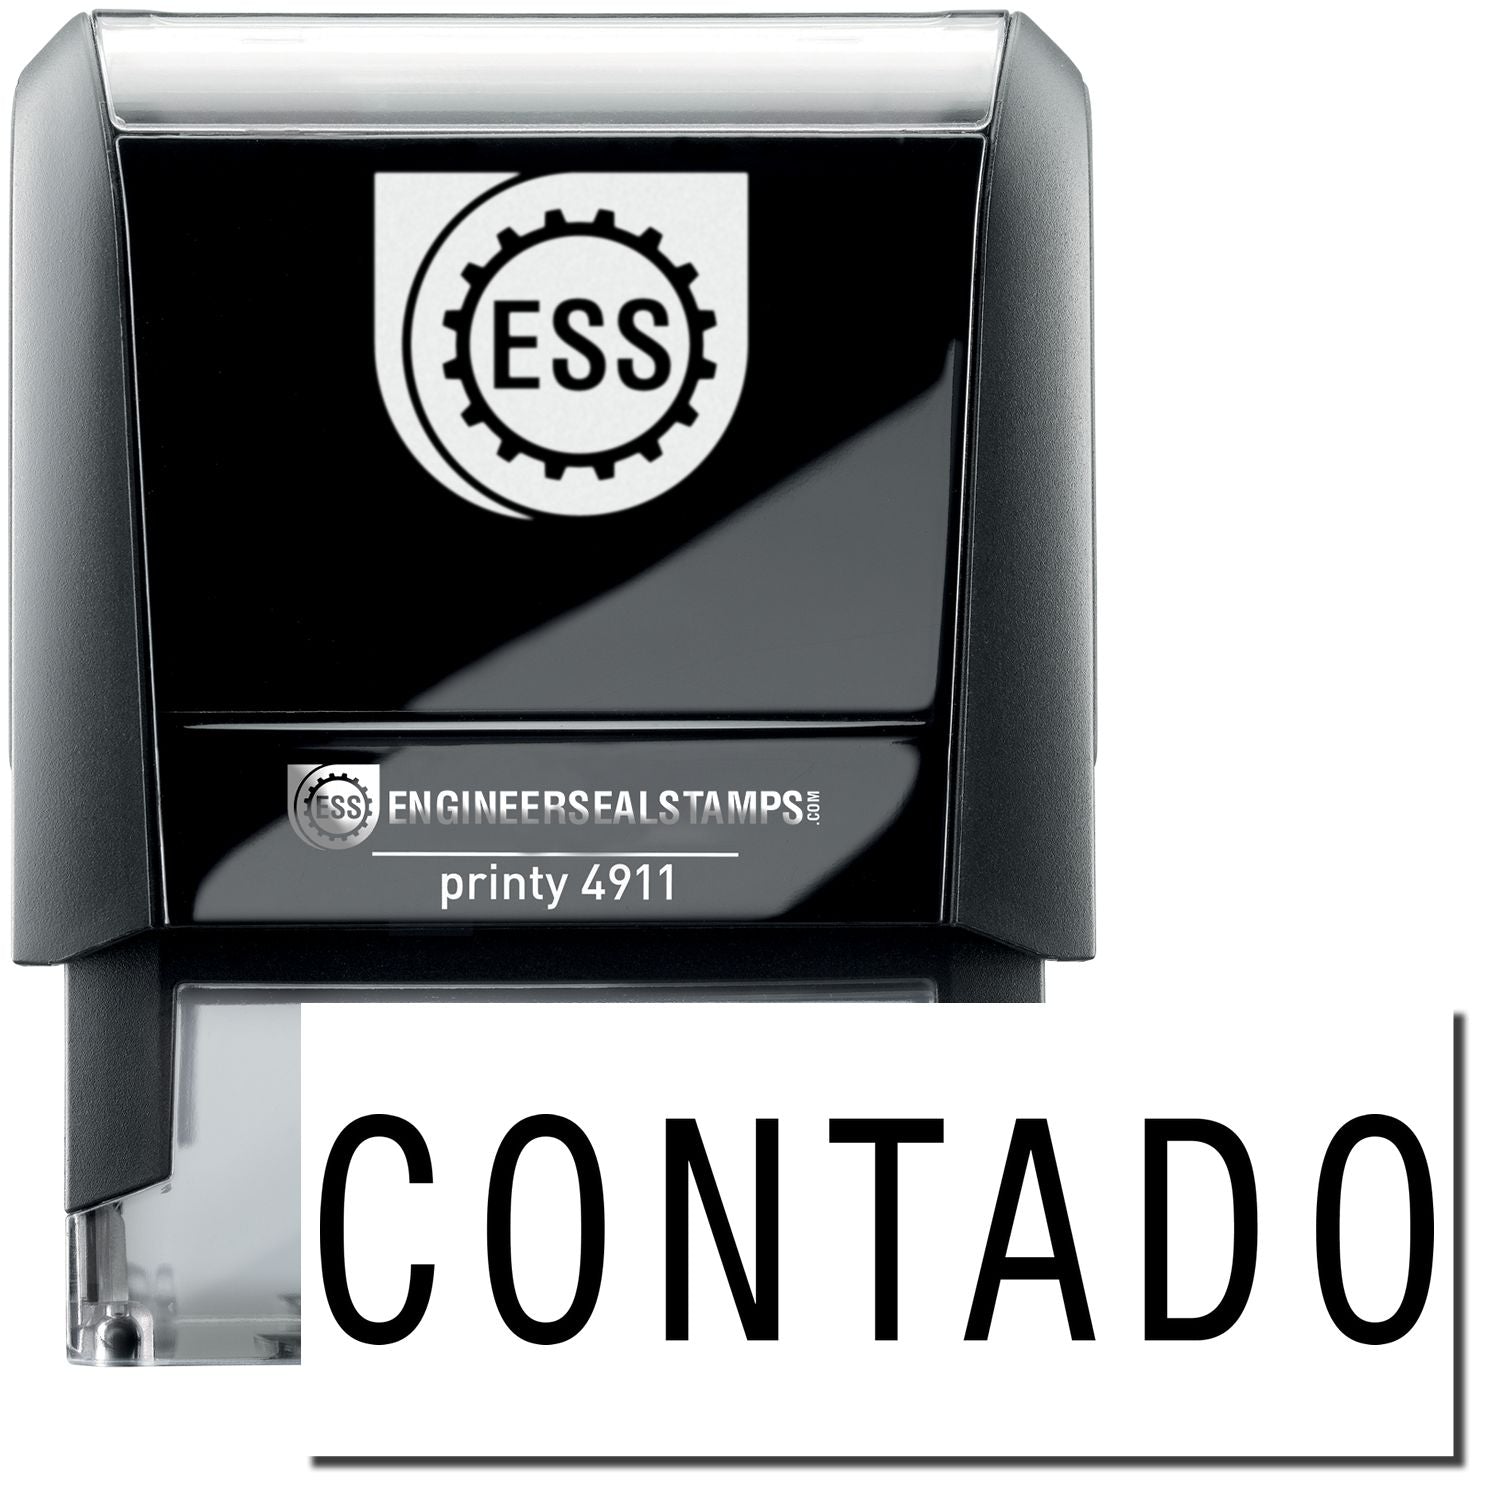 A self-inking stamp with a stamped image showing how the text "CONTADO" is displayed after stamping.